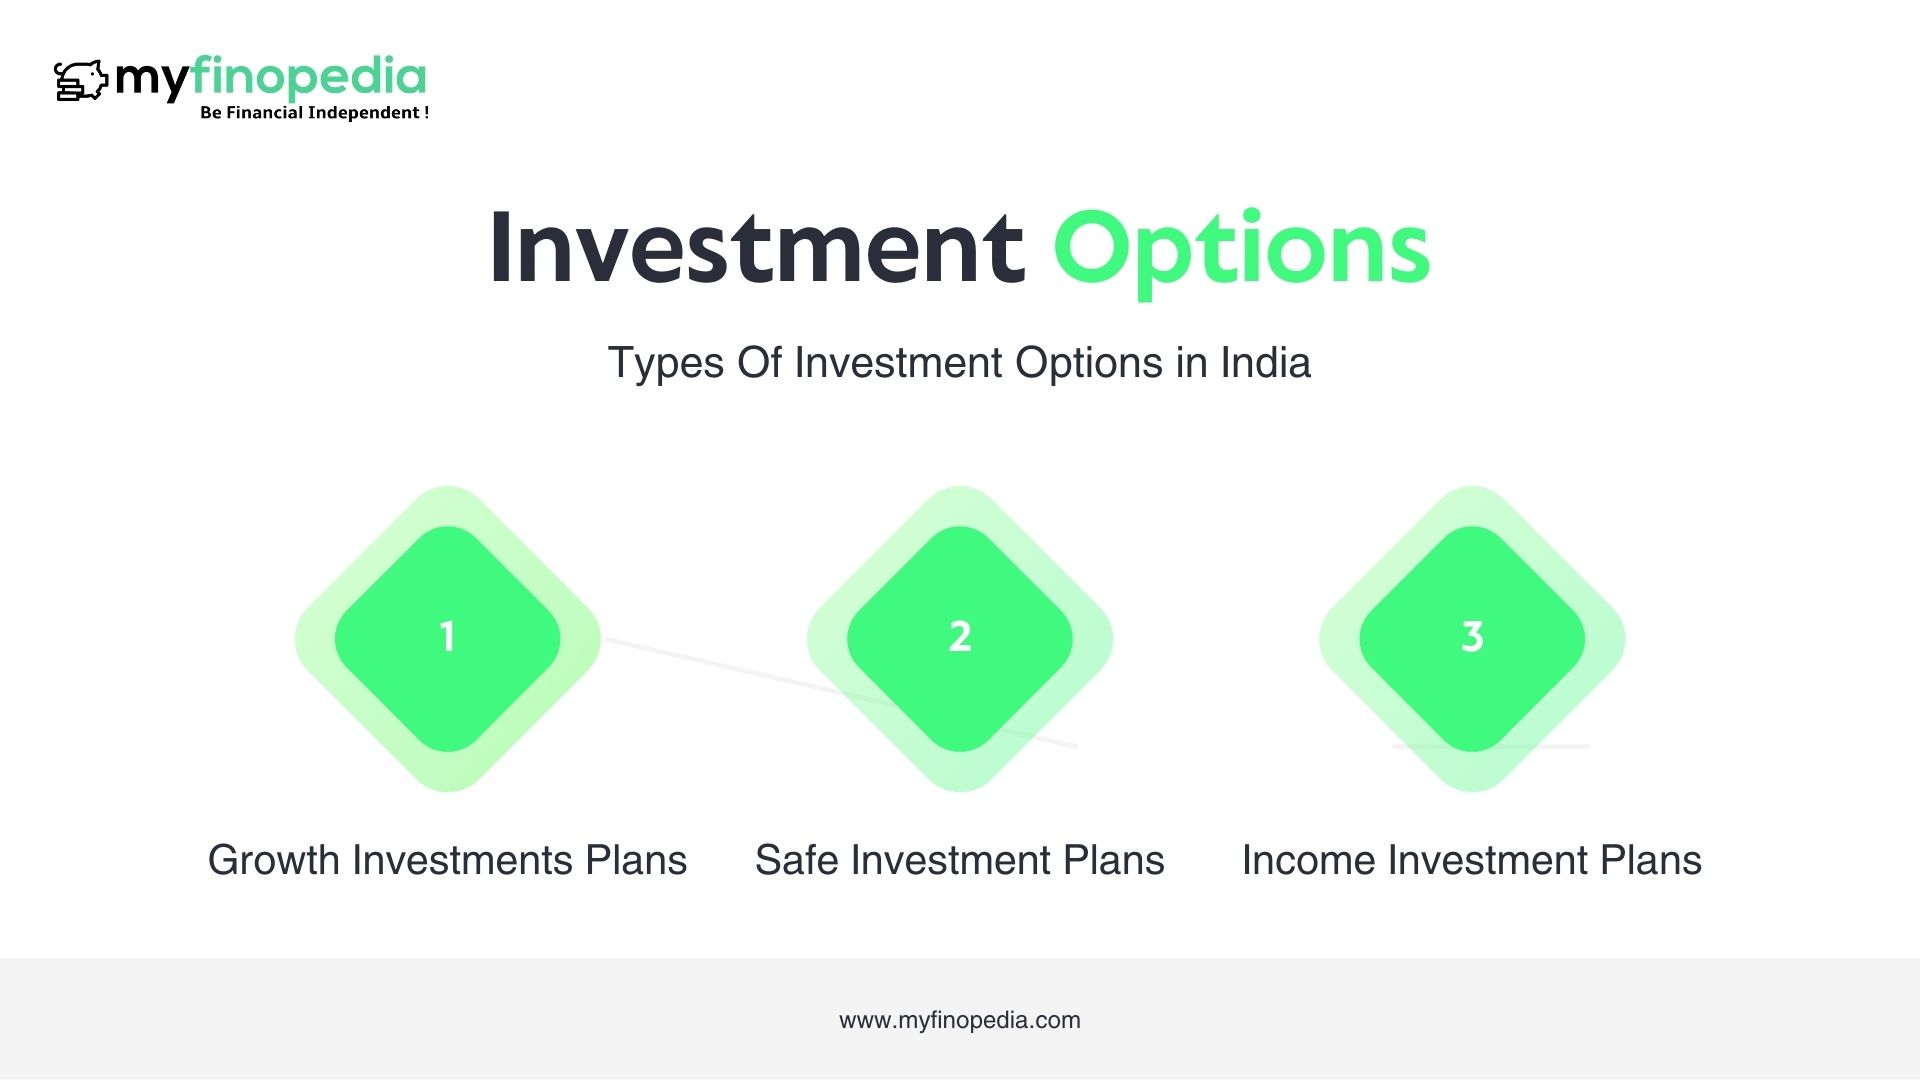 Types Of Investment Options in India